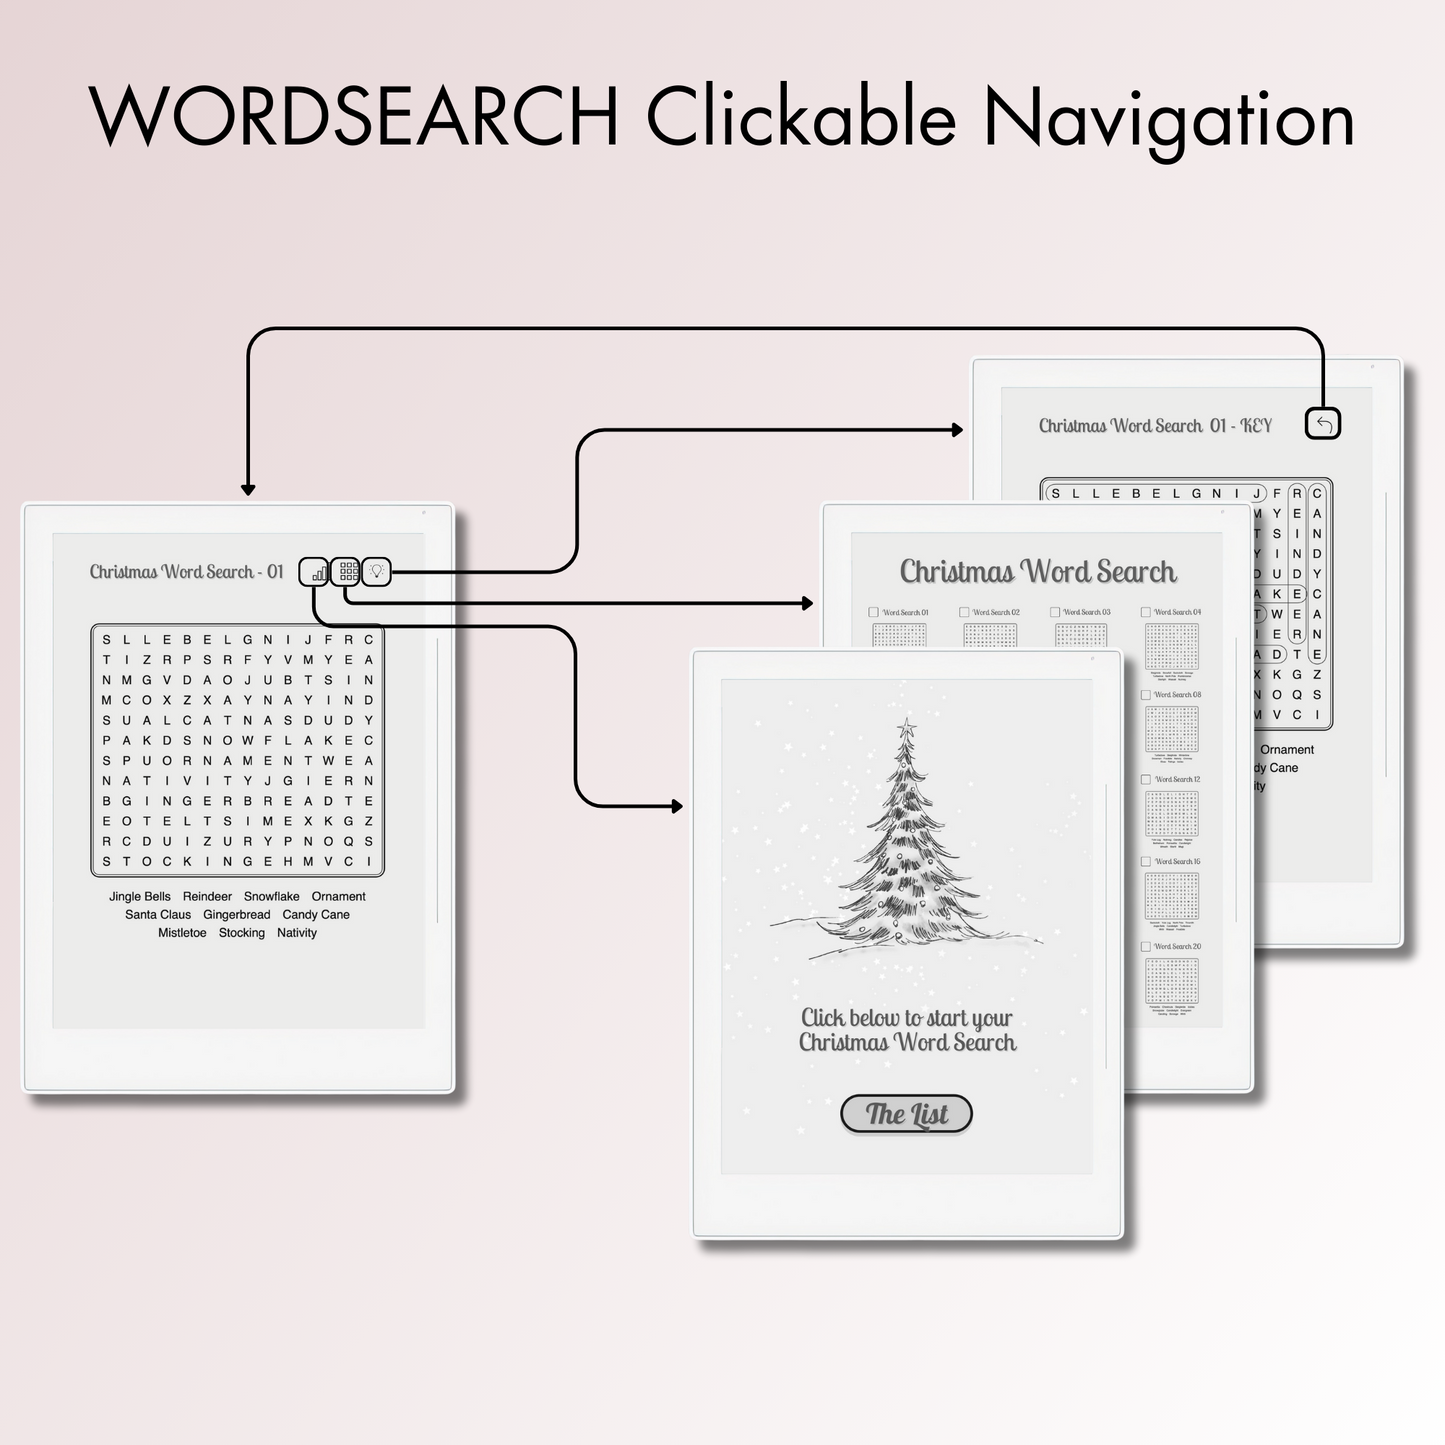 Supernote A5X and A6X Christmas Word Search Puzzles with full reference links.